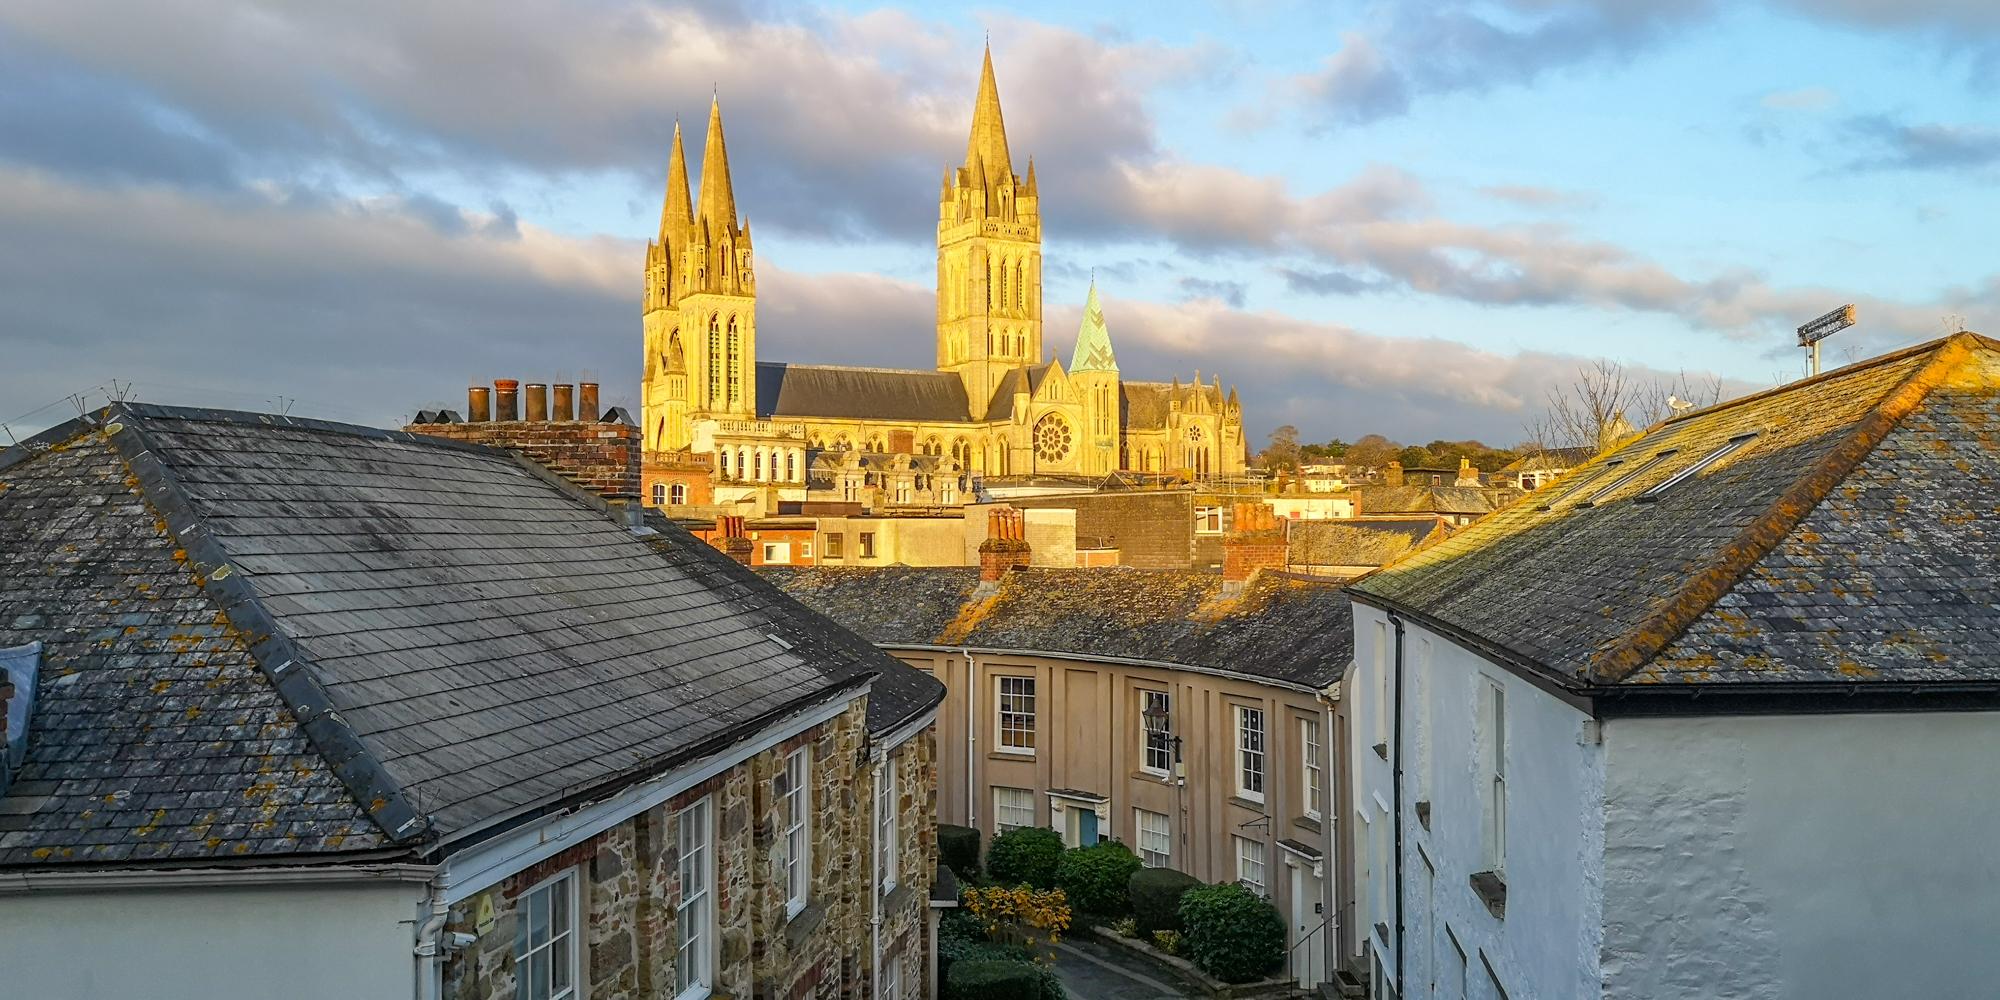 Truro from rooftops